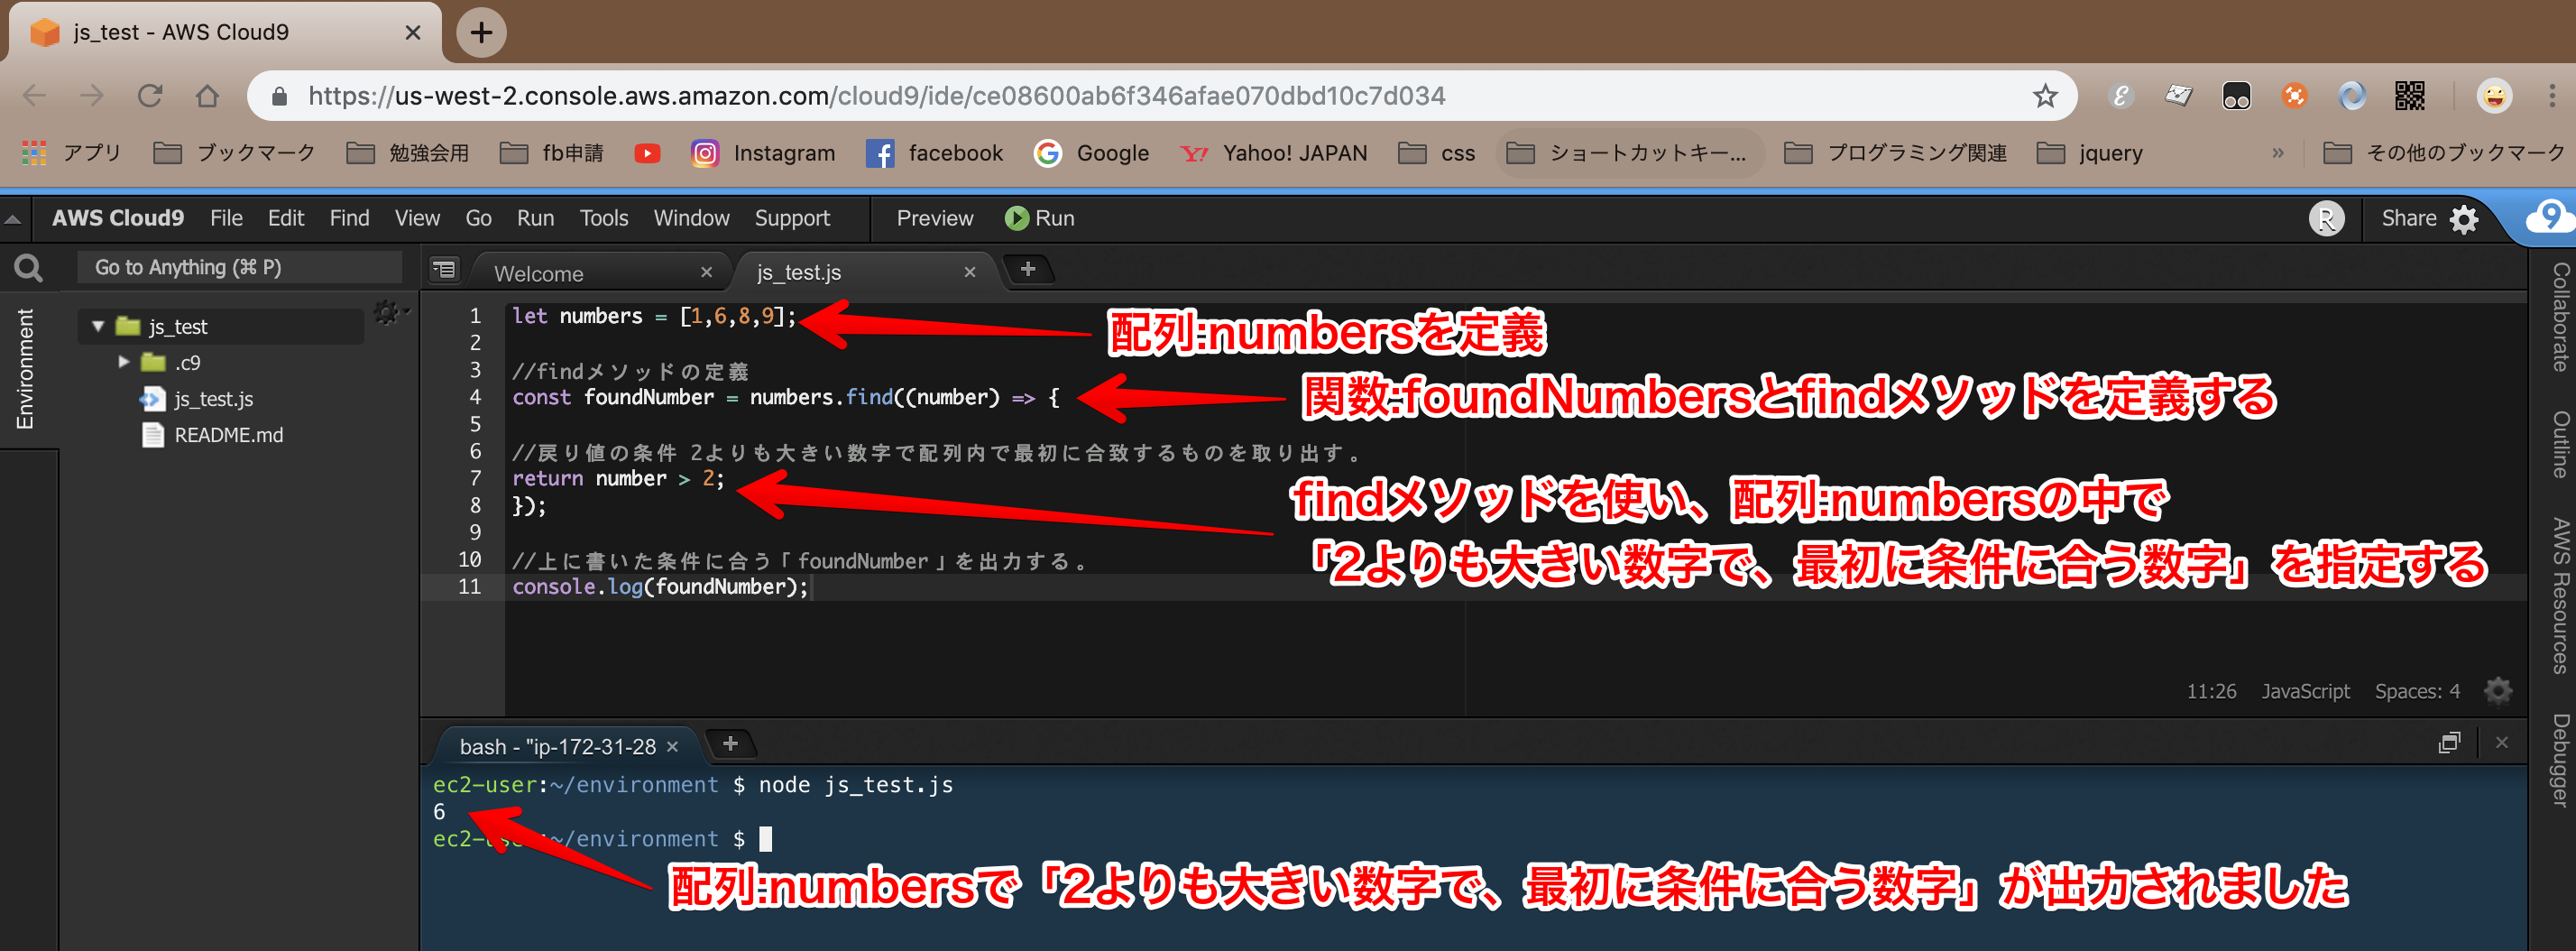 js findメソッド_修正版.png